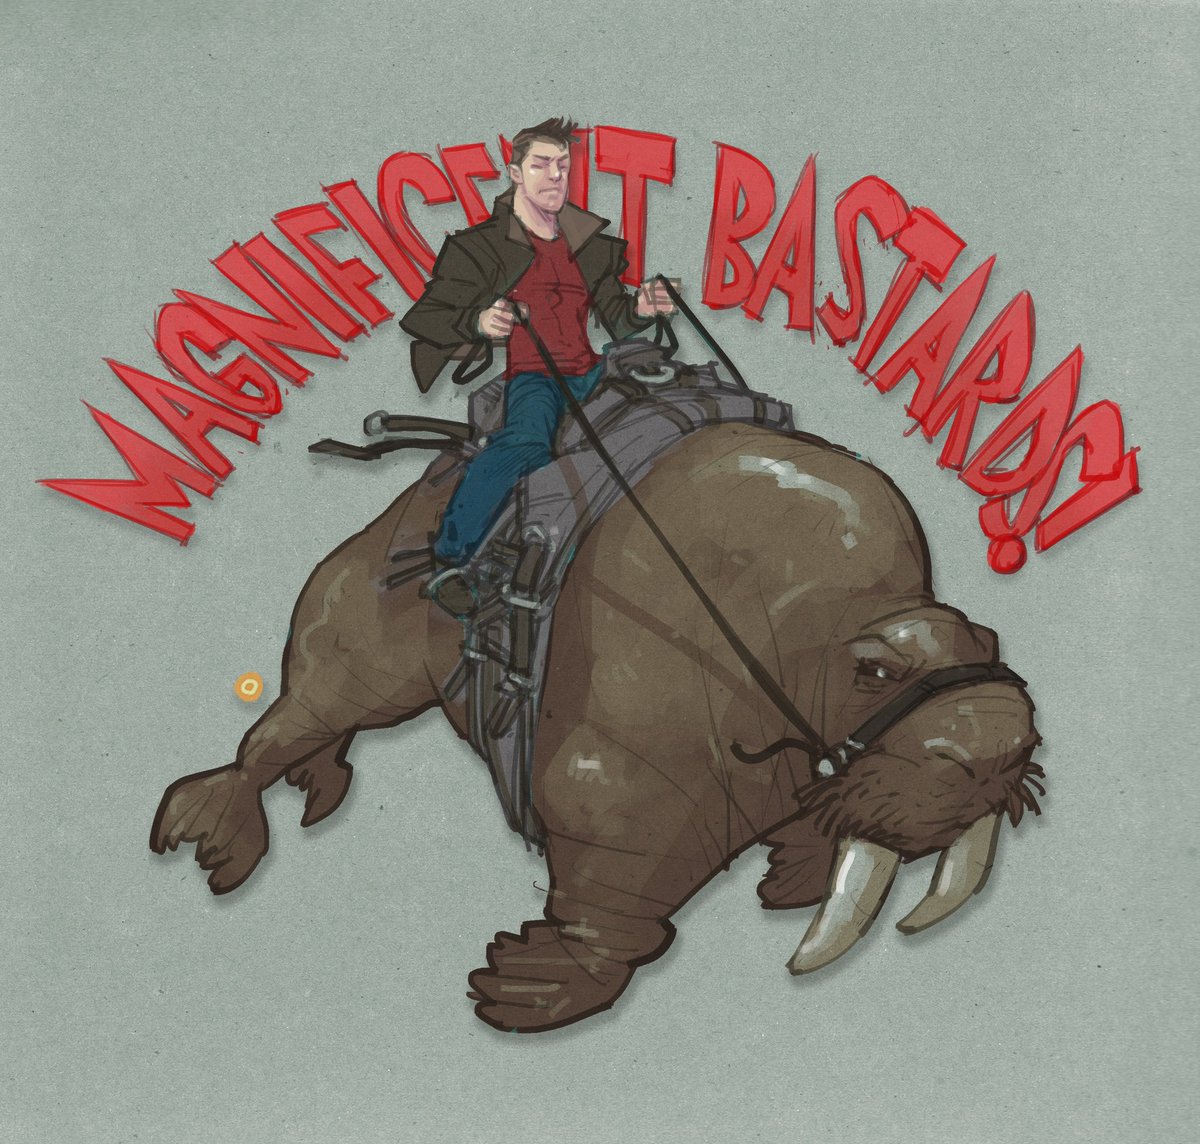 For a limited time we're offering Magnificent Bastards #1 as a FREE download! 
Get hooked before #2 hits!  
Download it here: …encompassentertainment.wetransfer.com/downloads/8ffa…
Also sign up for #2 on Indiegogo to continue the ride!
Sign up here: indiegogo.com/projects/magni…
#ironage #indiecomics